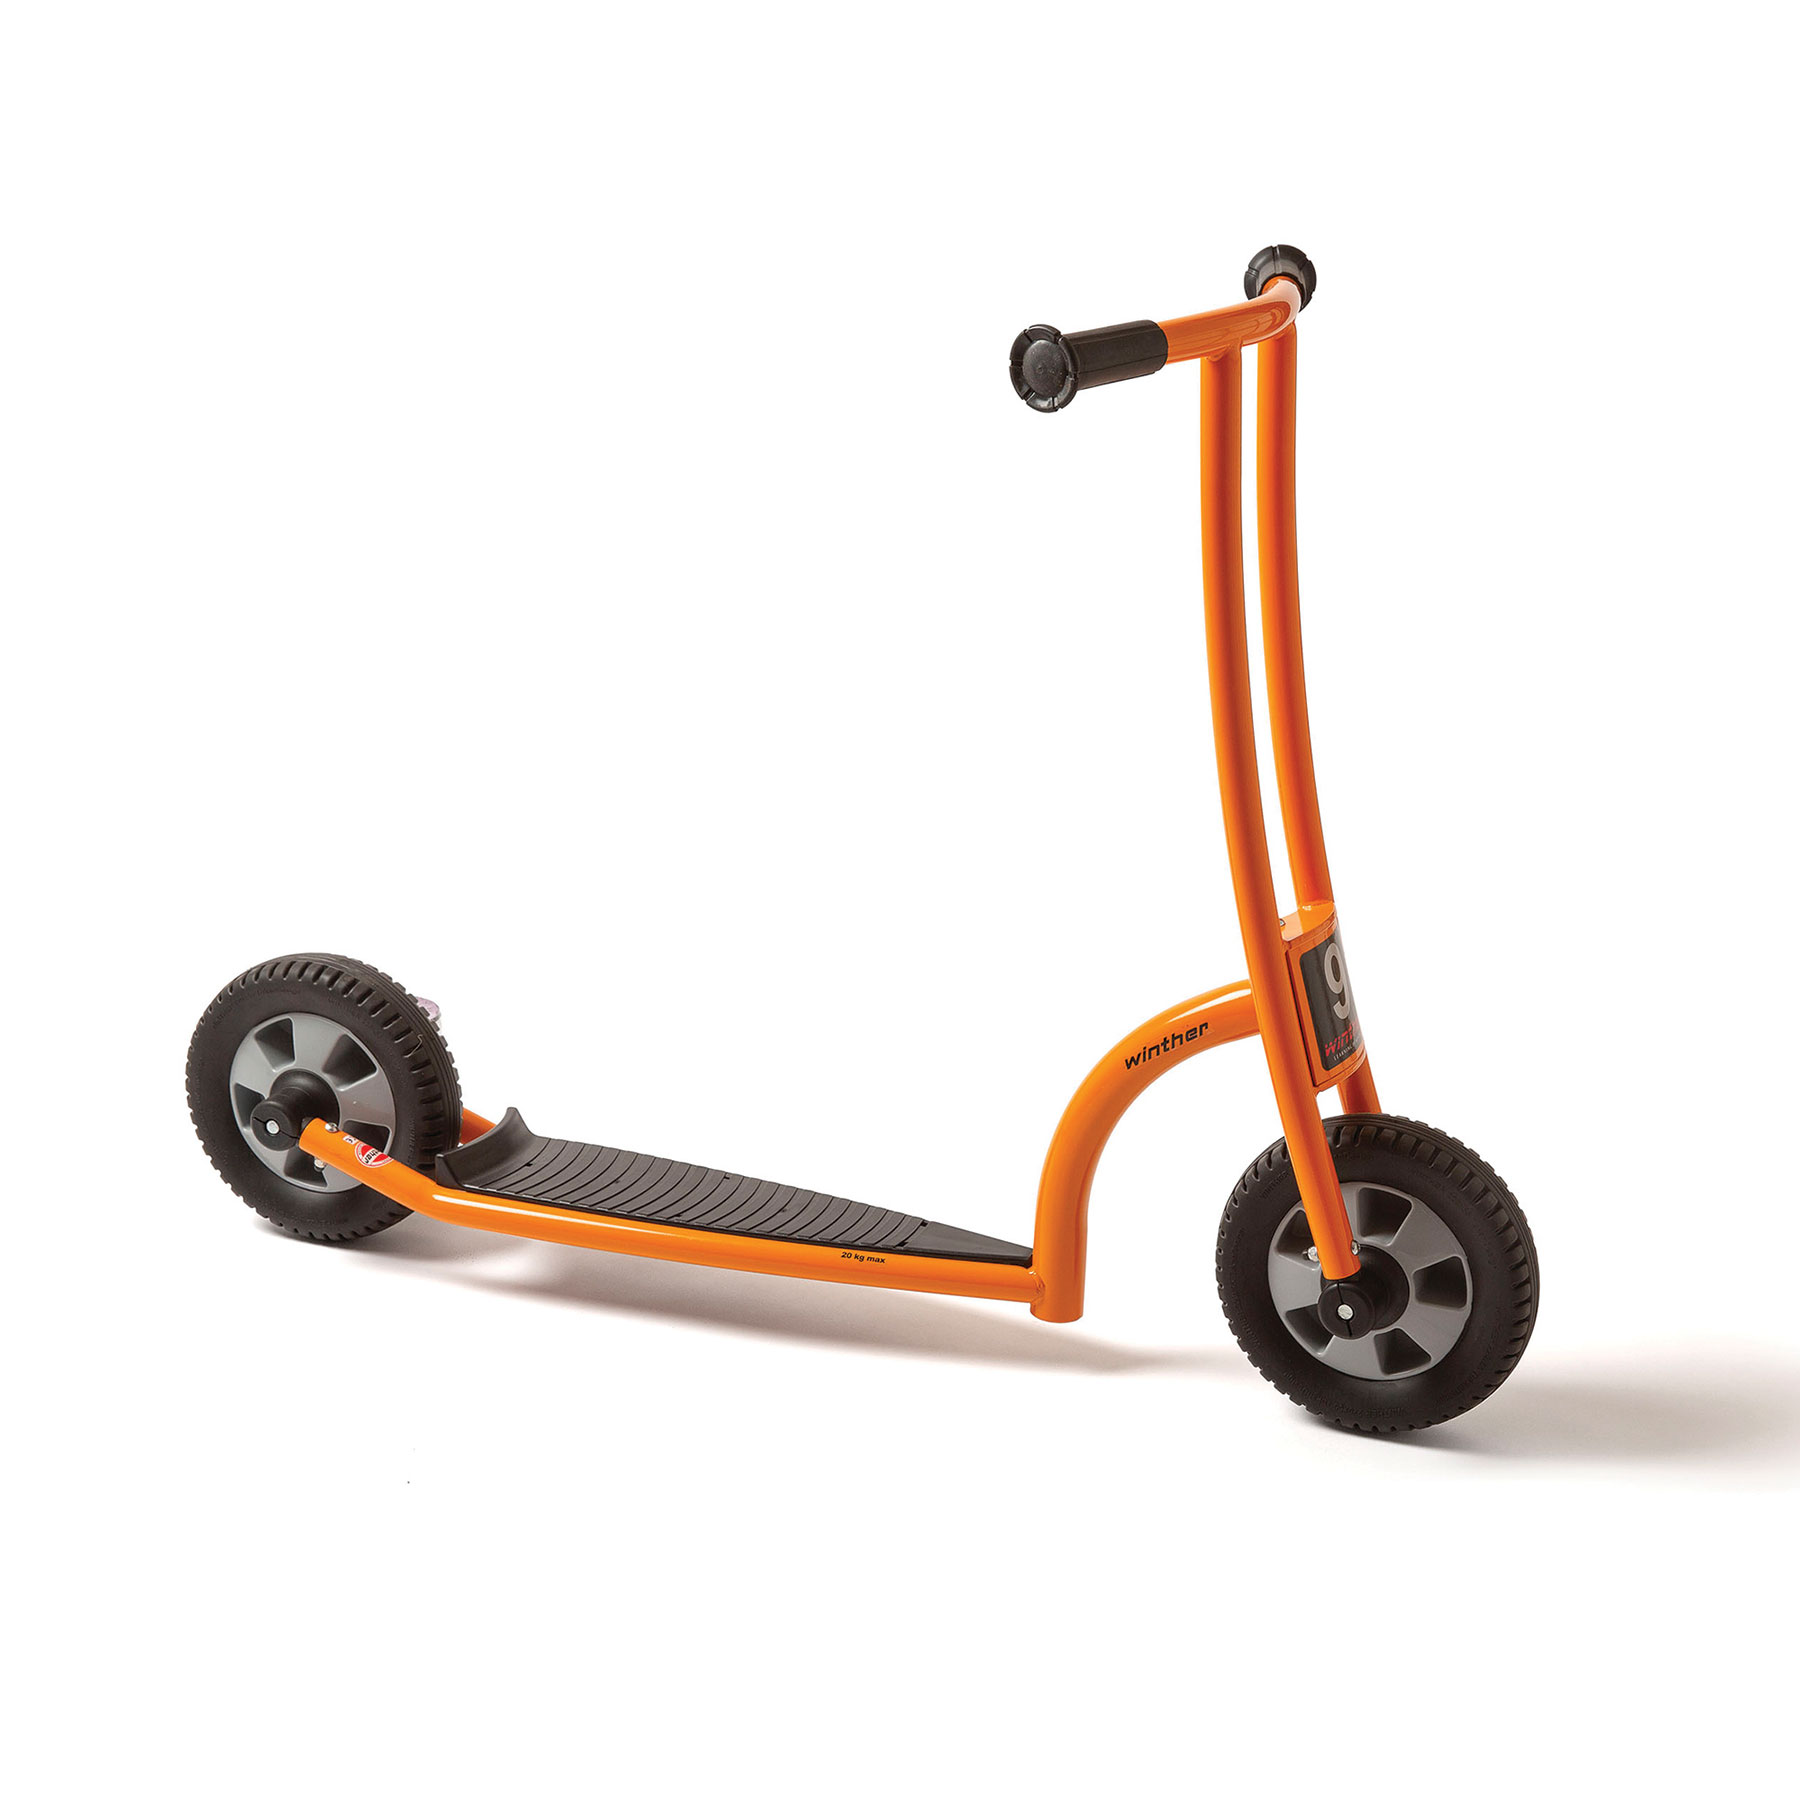 Winther Circleline Children's Scooter